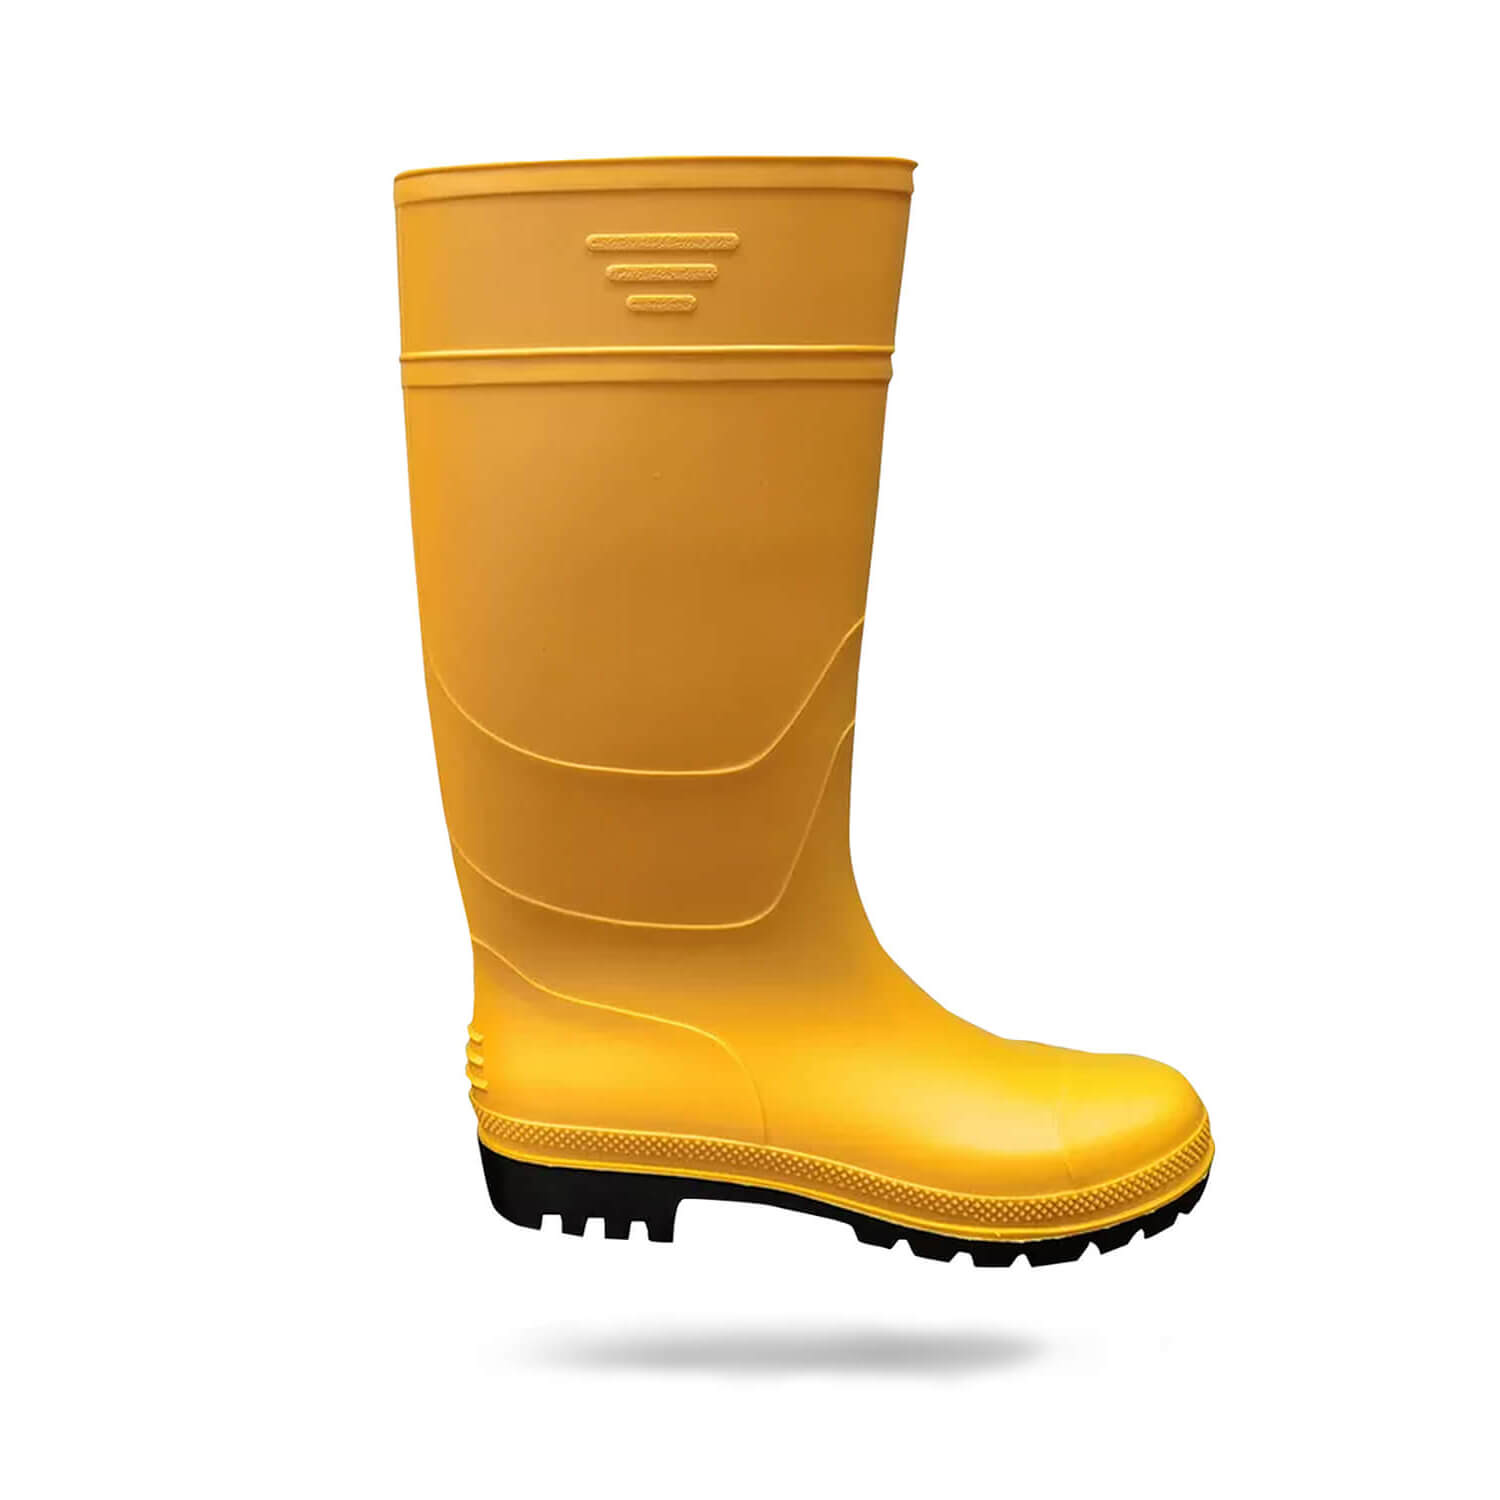 W 3072 - Y GUMBOOT WILLINGTON - Patron safety products in UAE and USA